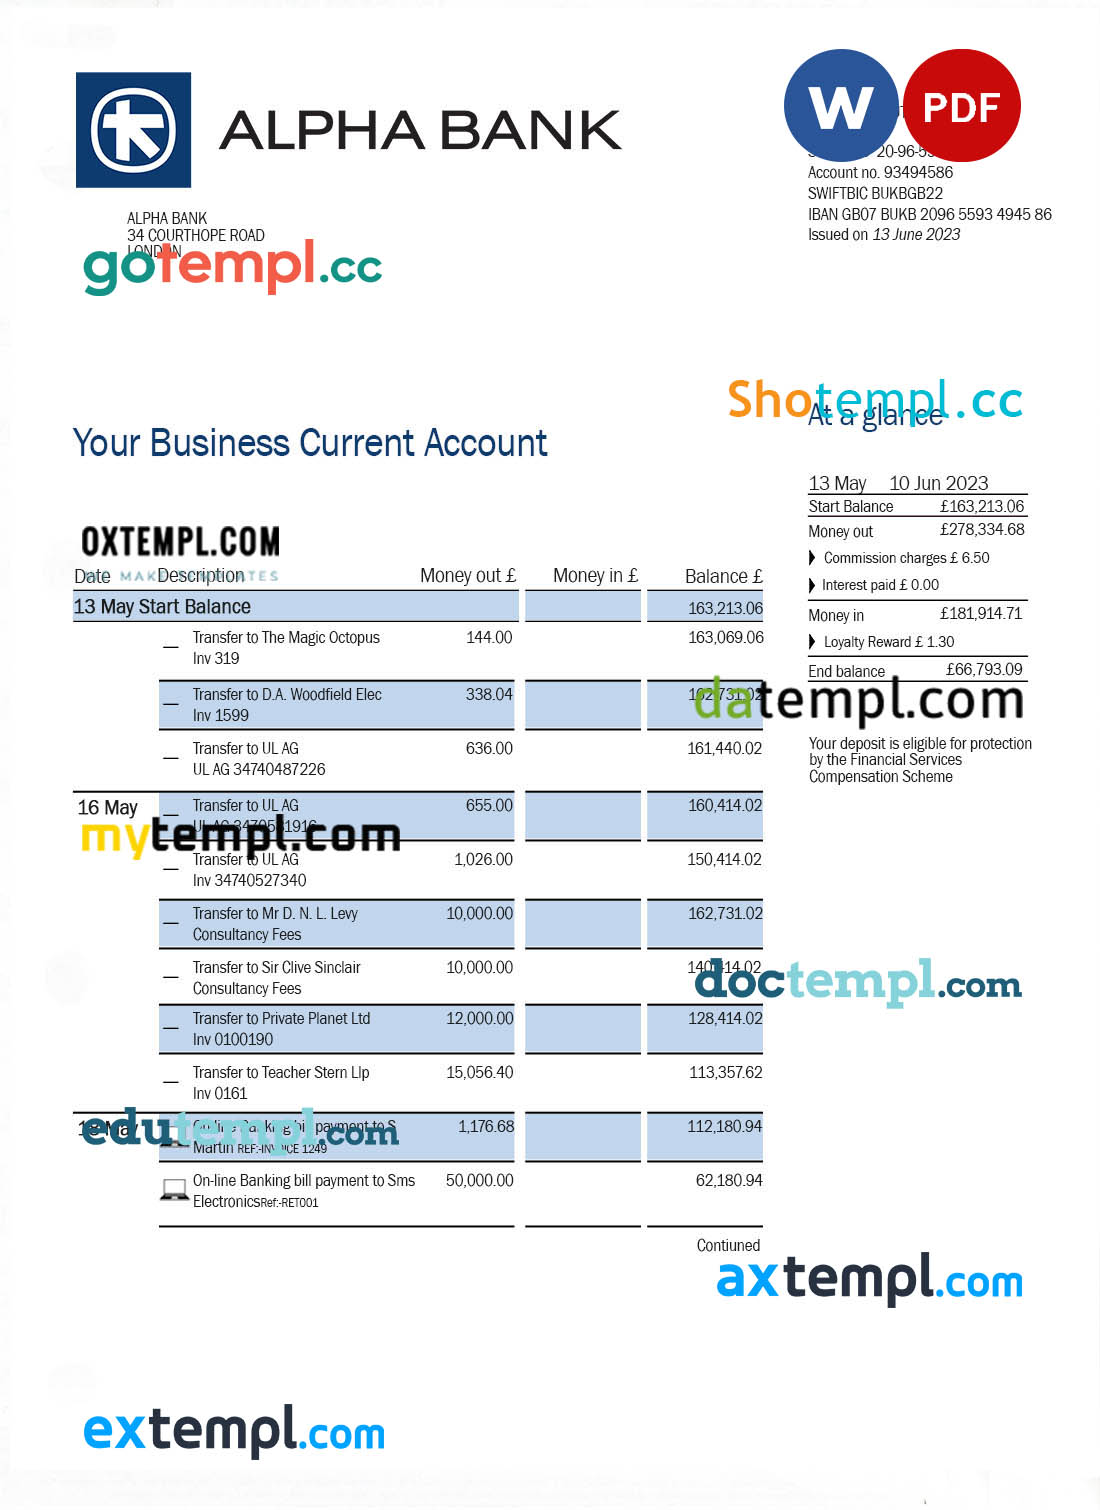 Mongolia business registration certificate Word and PDF template